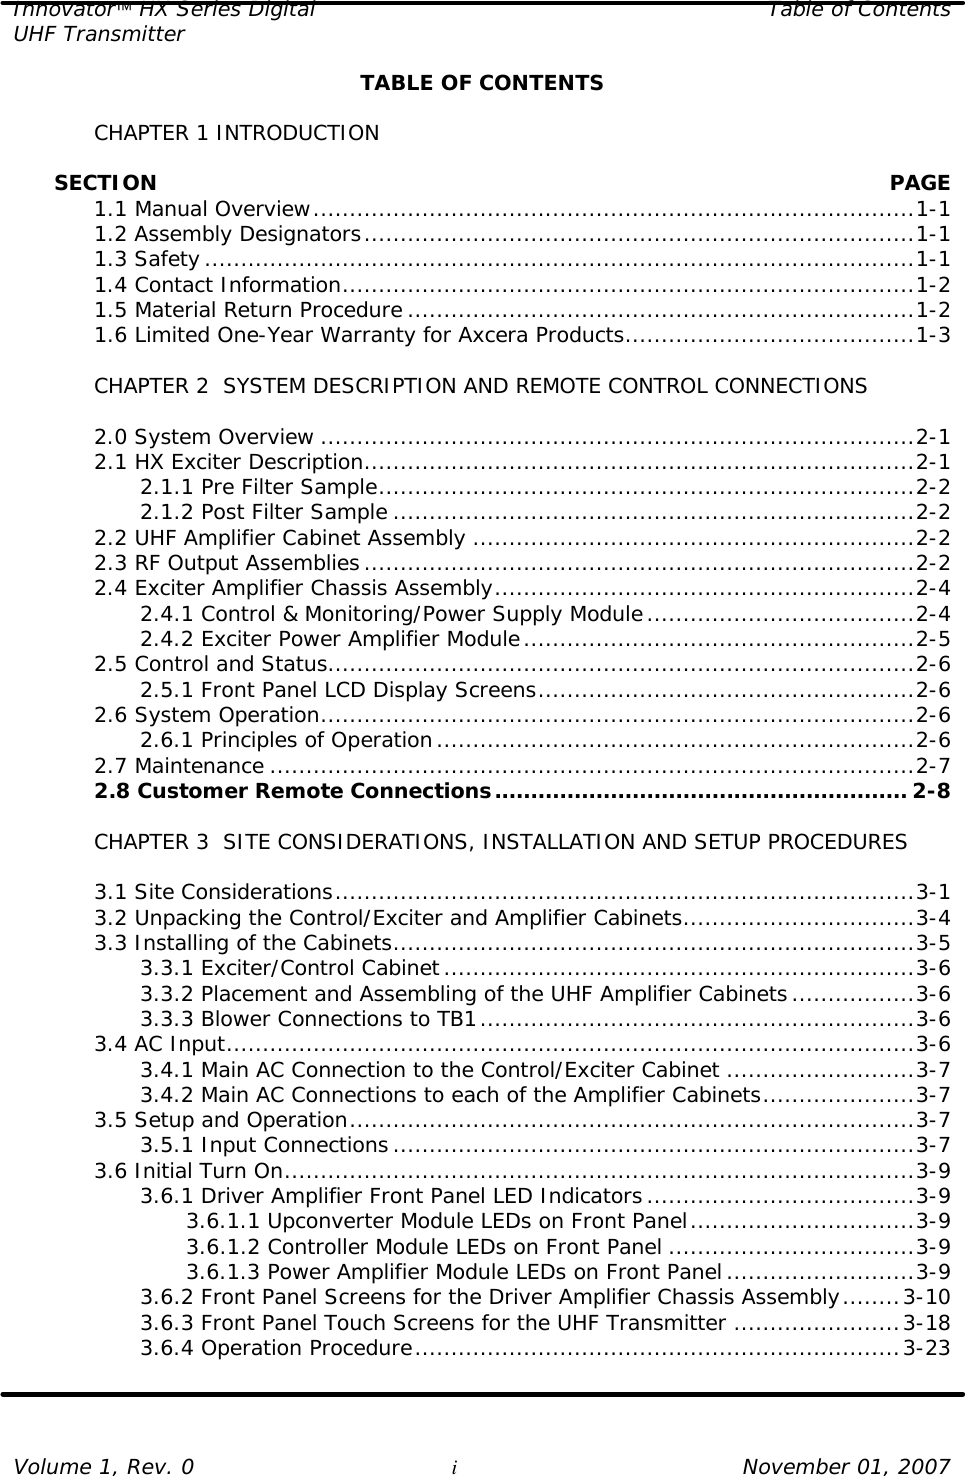 Innovator HX Series Digital Table of Contents UHF Transmitter  Volume 1, Rev. 0 i November 01, 2007 TABLE OF CONTENTS   CHAPTER 1 INTRODUCTION        SECTION    PAGE  1.1 Manual Overview...................................................................................1-1  1.2 Assembly Designators............................................................................1-1  1.3 Safety..................................................................................................1-1  1.4 Contact Information...............................................................................1-2  1.5 Material Return Procedure ......................................................................1-2  1.6 Limited One-Year Warranty for Axcera Products........................................1-3   CHAPTER 2  SYSTEM DESCRIPTION AND REMOTE CONTROL CONNECTIONS   2.0 System Overview ..................................................................................2-1  2.1 HX Exciter Description............................................................................2-1     2.1.1 Pre Filter Sample..........................................................................2-2     2.1.2 Post Filter Sample ........................................................................2-2  2.2 UHF Amplifier Cabinet Assembly .............................................................2-2  2.3 RF Output Assemblies............................................................................2-2  2.4 Exciter Amplifier Chassis Assembly..........................................................2-4     2.4.1 Control &amp; Monitoring/Power Supply Module.....................................2-4     2.4.2 Exciter Power Amplifier Module......................................................2-5  2.5 Control and Status.................................................................................2-6     2.5.1 Front Panel LCD Display Screens....................................................2-6  2.6 System Operation..................................................................................2-6     2.6.1 Principles of Operation..................................................................2-6  2.7 Maintenance .........................................................................................2-7  2.8 Customer Remote Connections......................................................... 2-8   CHAPTER 3  SITE CONSIDERATIONS, INSTALLATION AND SETUP PROCEDURES     3.1 Site Considerations................................................................................3-1  3.2 Unpacking the Control/Exciter and Amplifier Cabinets................................3-4  3.3 Installing of the Cabinets........................................................................3-5     3.3.1 Exciter/Control Cabinet.................................................................3-6     3.3.2 Placement and Assembling of the UHF Amplifier Cabinets.................3-6     3.3.3 Blower Connections to TB1............................................................3-6  3.4 AC Input...............................................................................................3-6     3.4.1 Main AC Connection to the Control/Exciter Cabinet ..........................3-7     3.4.2 Main AC Connections to each of the Amplifier Cabinets.....................3-7  3.5 Setup and Operation..............................................................................3-7     3.5.1 Input Connections........................................................................3-7  3.6 Initial Turn On.......................................................................................3-9     3.6.1 Driver Amplifier Front Panel LED Indicators.....................................3-9     3.6.1.1 Upconverter Module LEDs on Front Panel...............................3-9     3.6.1.2 Controller Module LEDs on Front Panel ..................................3-9     3.6.1.3 Power Amplifier Module LEDs on Front Panel..........................3-9     3.6.2 Front Panel Screens for the Driver Amplifier Chassis Assembly........3-10     3.6.3 Front Panel Touch Screens for the UHF Transmitter .......................3-18     3.6.4 Operation Procedure...................................................................3-23   